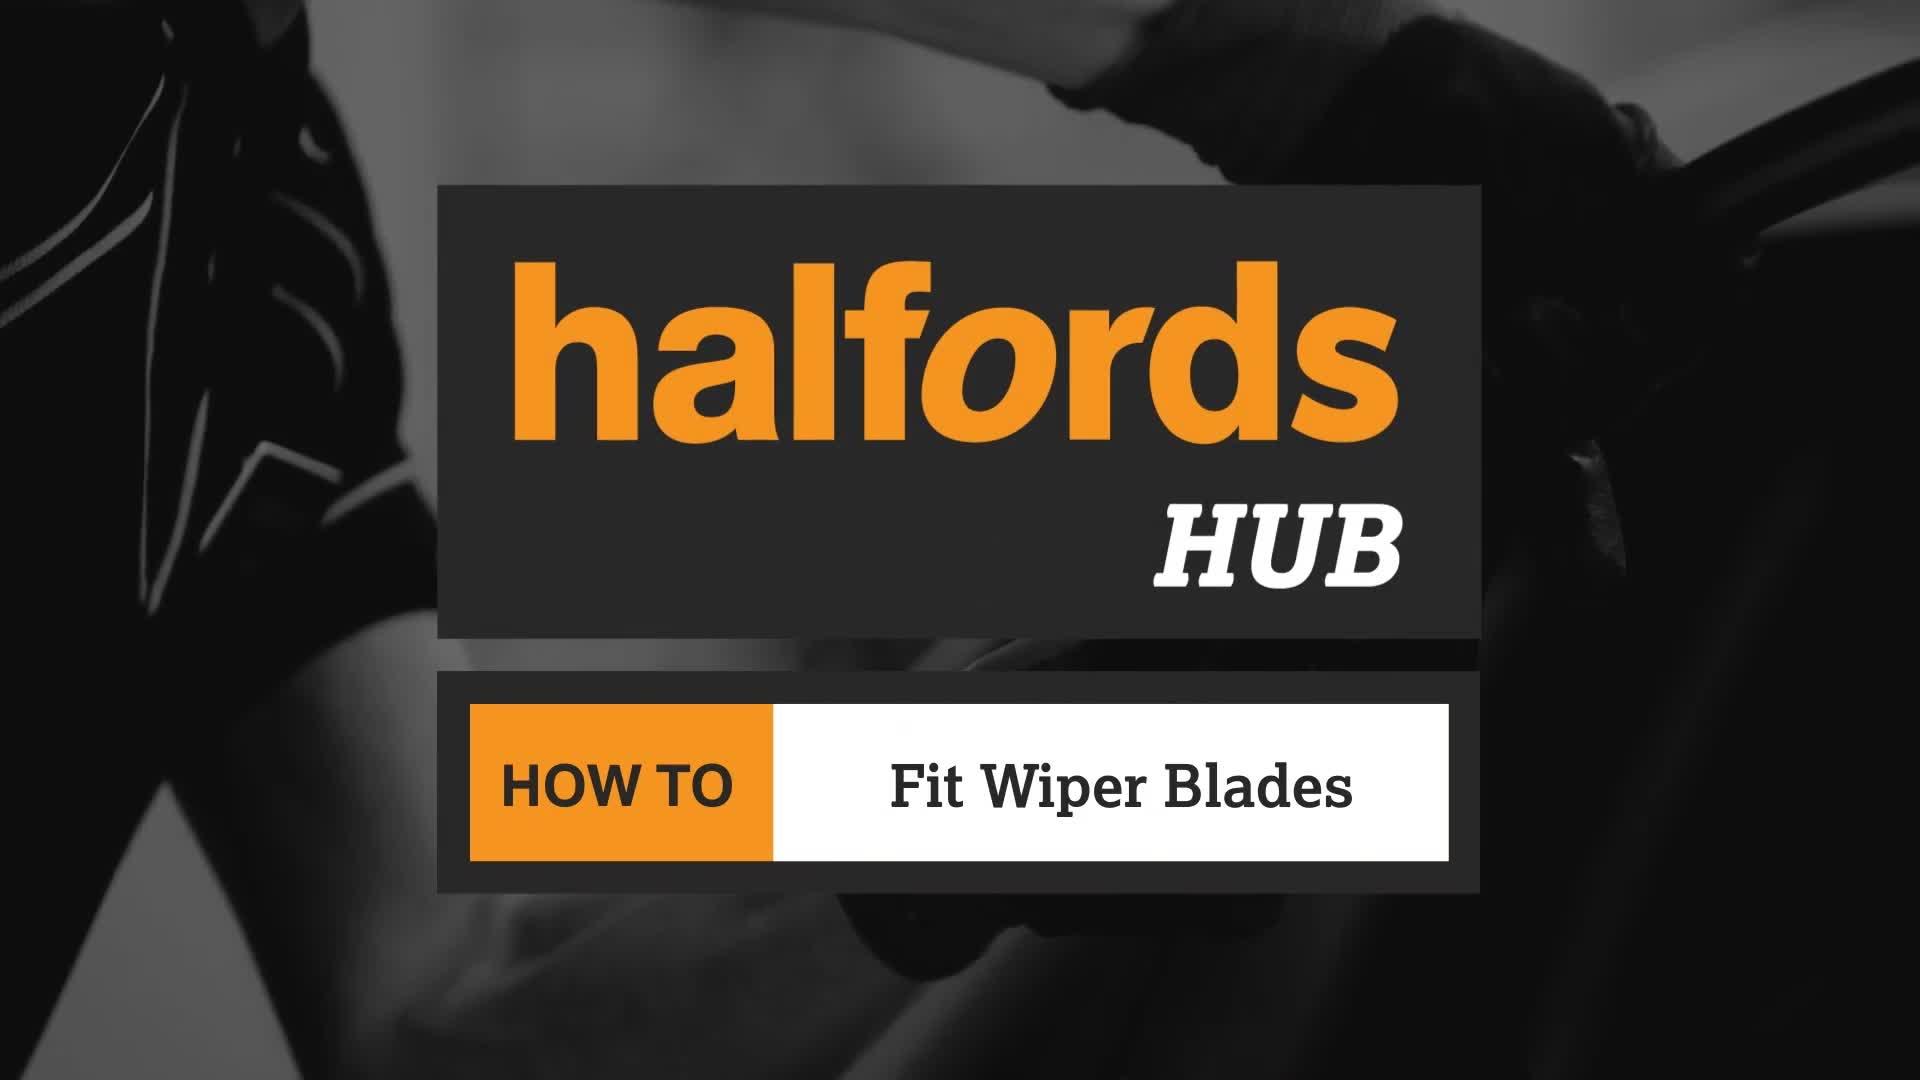 How to Fit Wiper Blades